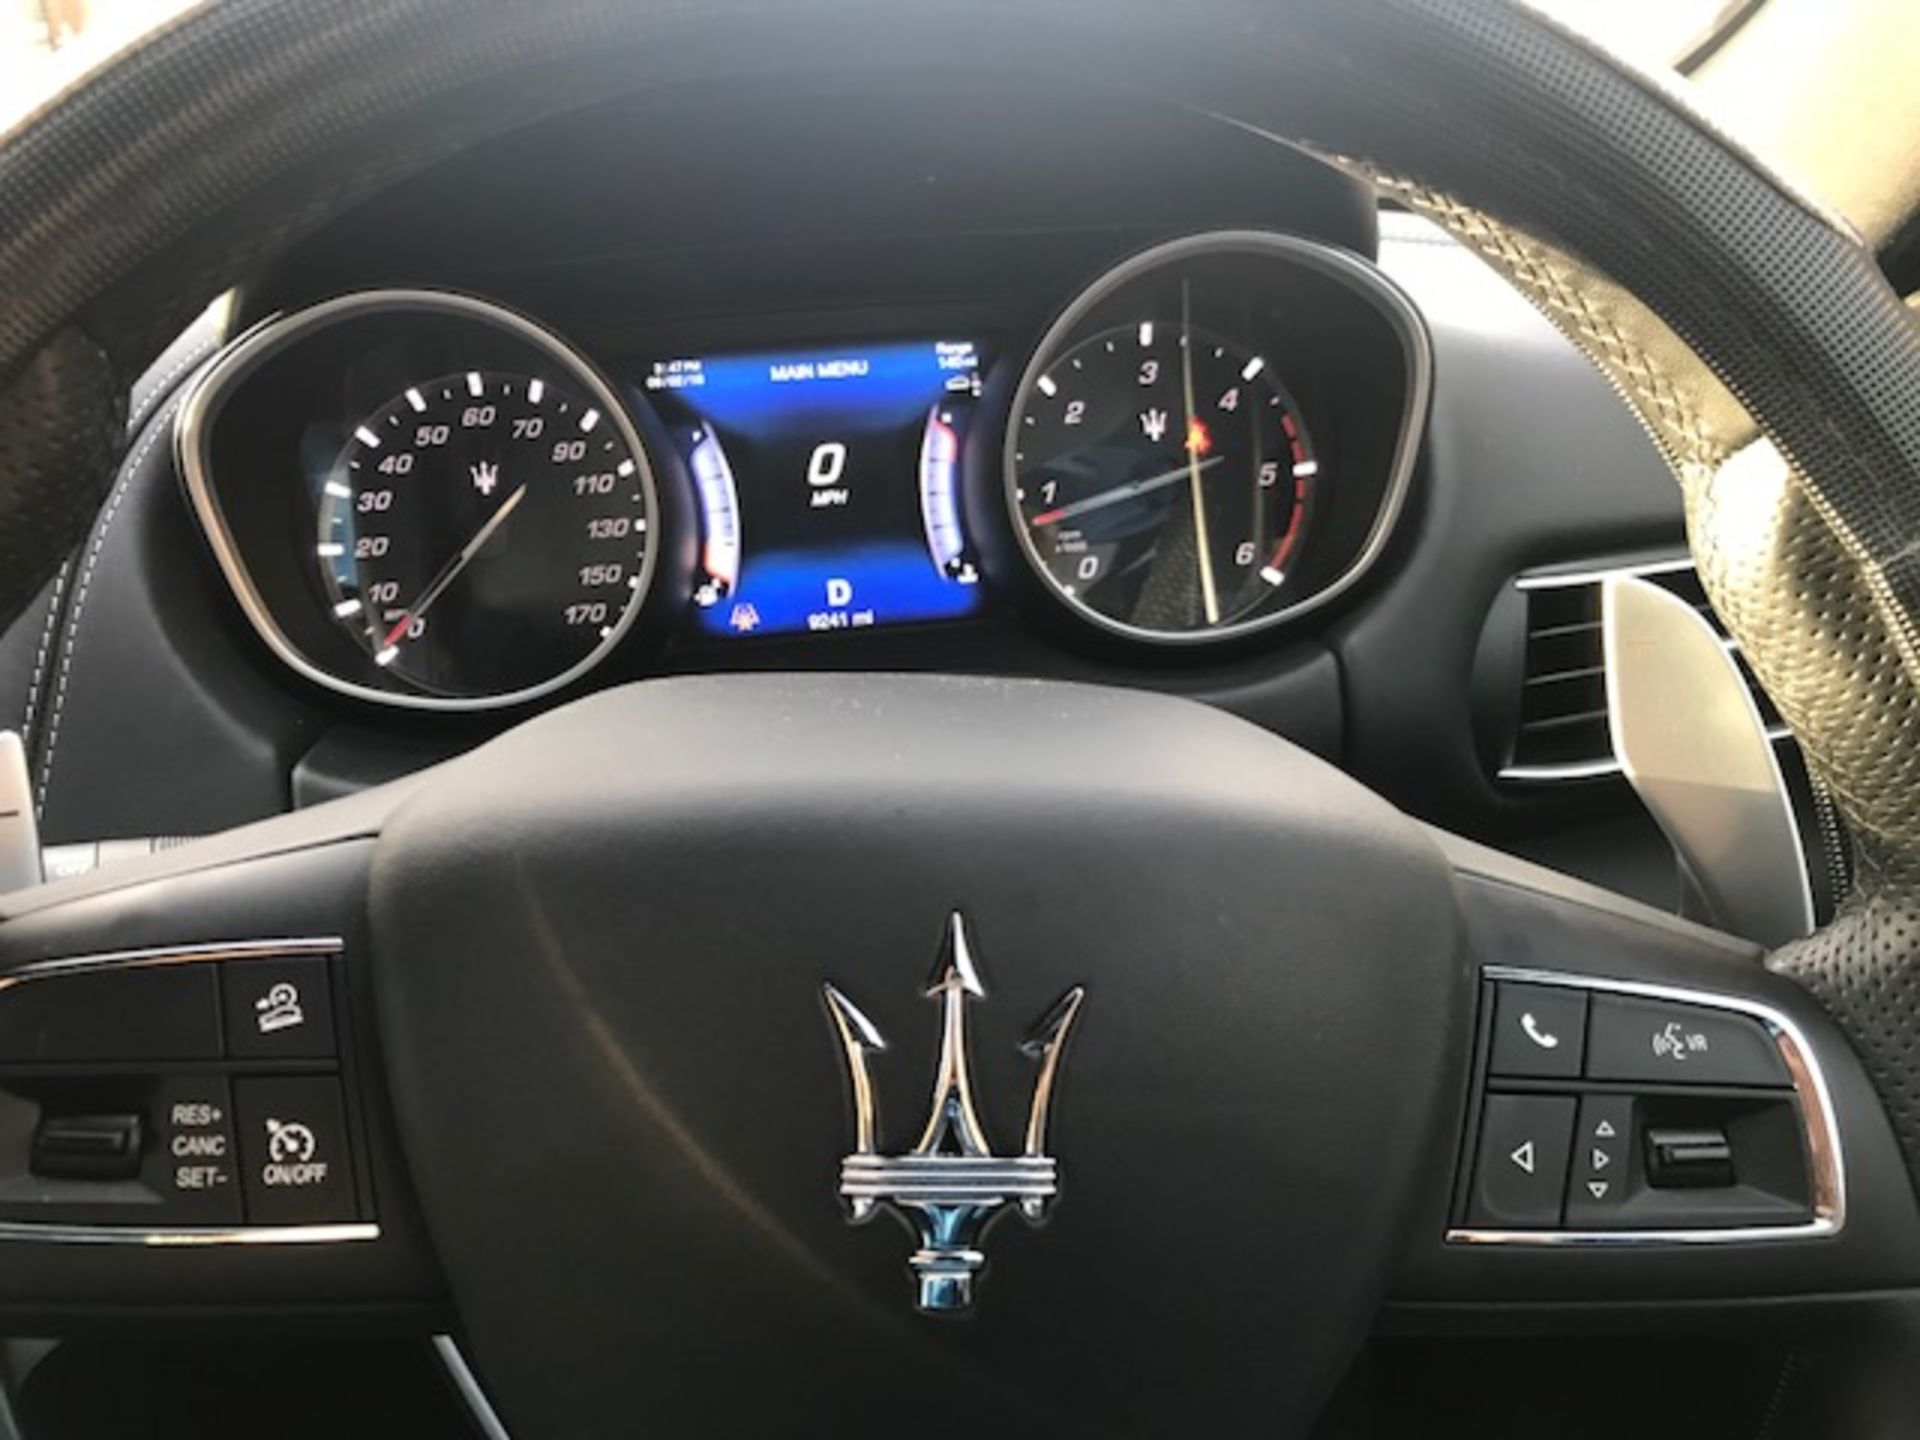 2017 Maserati Lavante 3L Turbo. 1 Owner From New. Low Mileage - Image 7 of 14